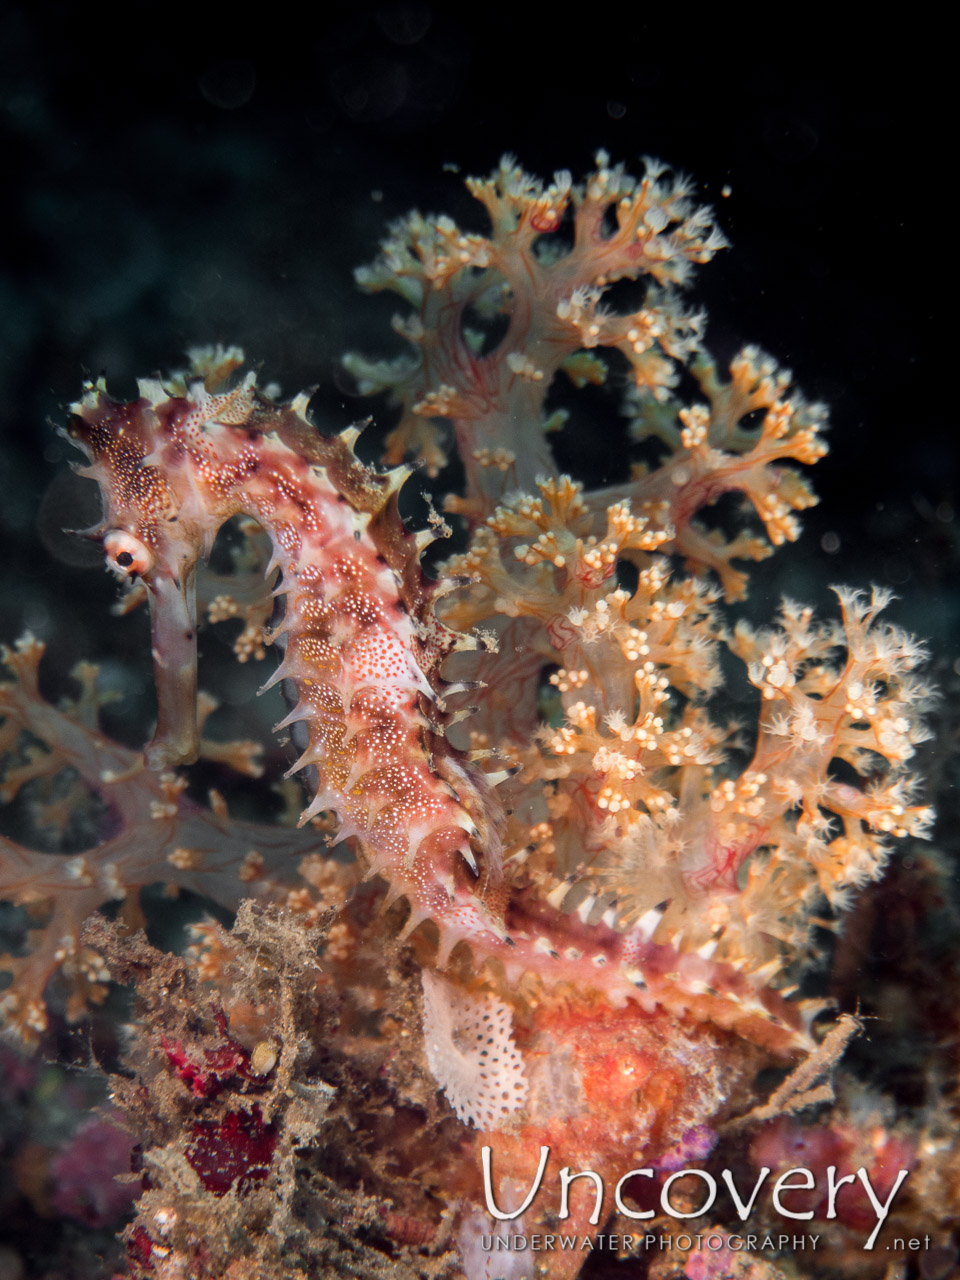 Thorny Seahorse (hippocampus Histrix), photo taken in Indonesia, North Sulawesi, Lembeh Strait, Goby a Crab